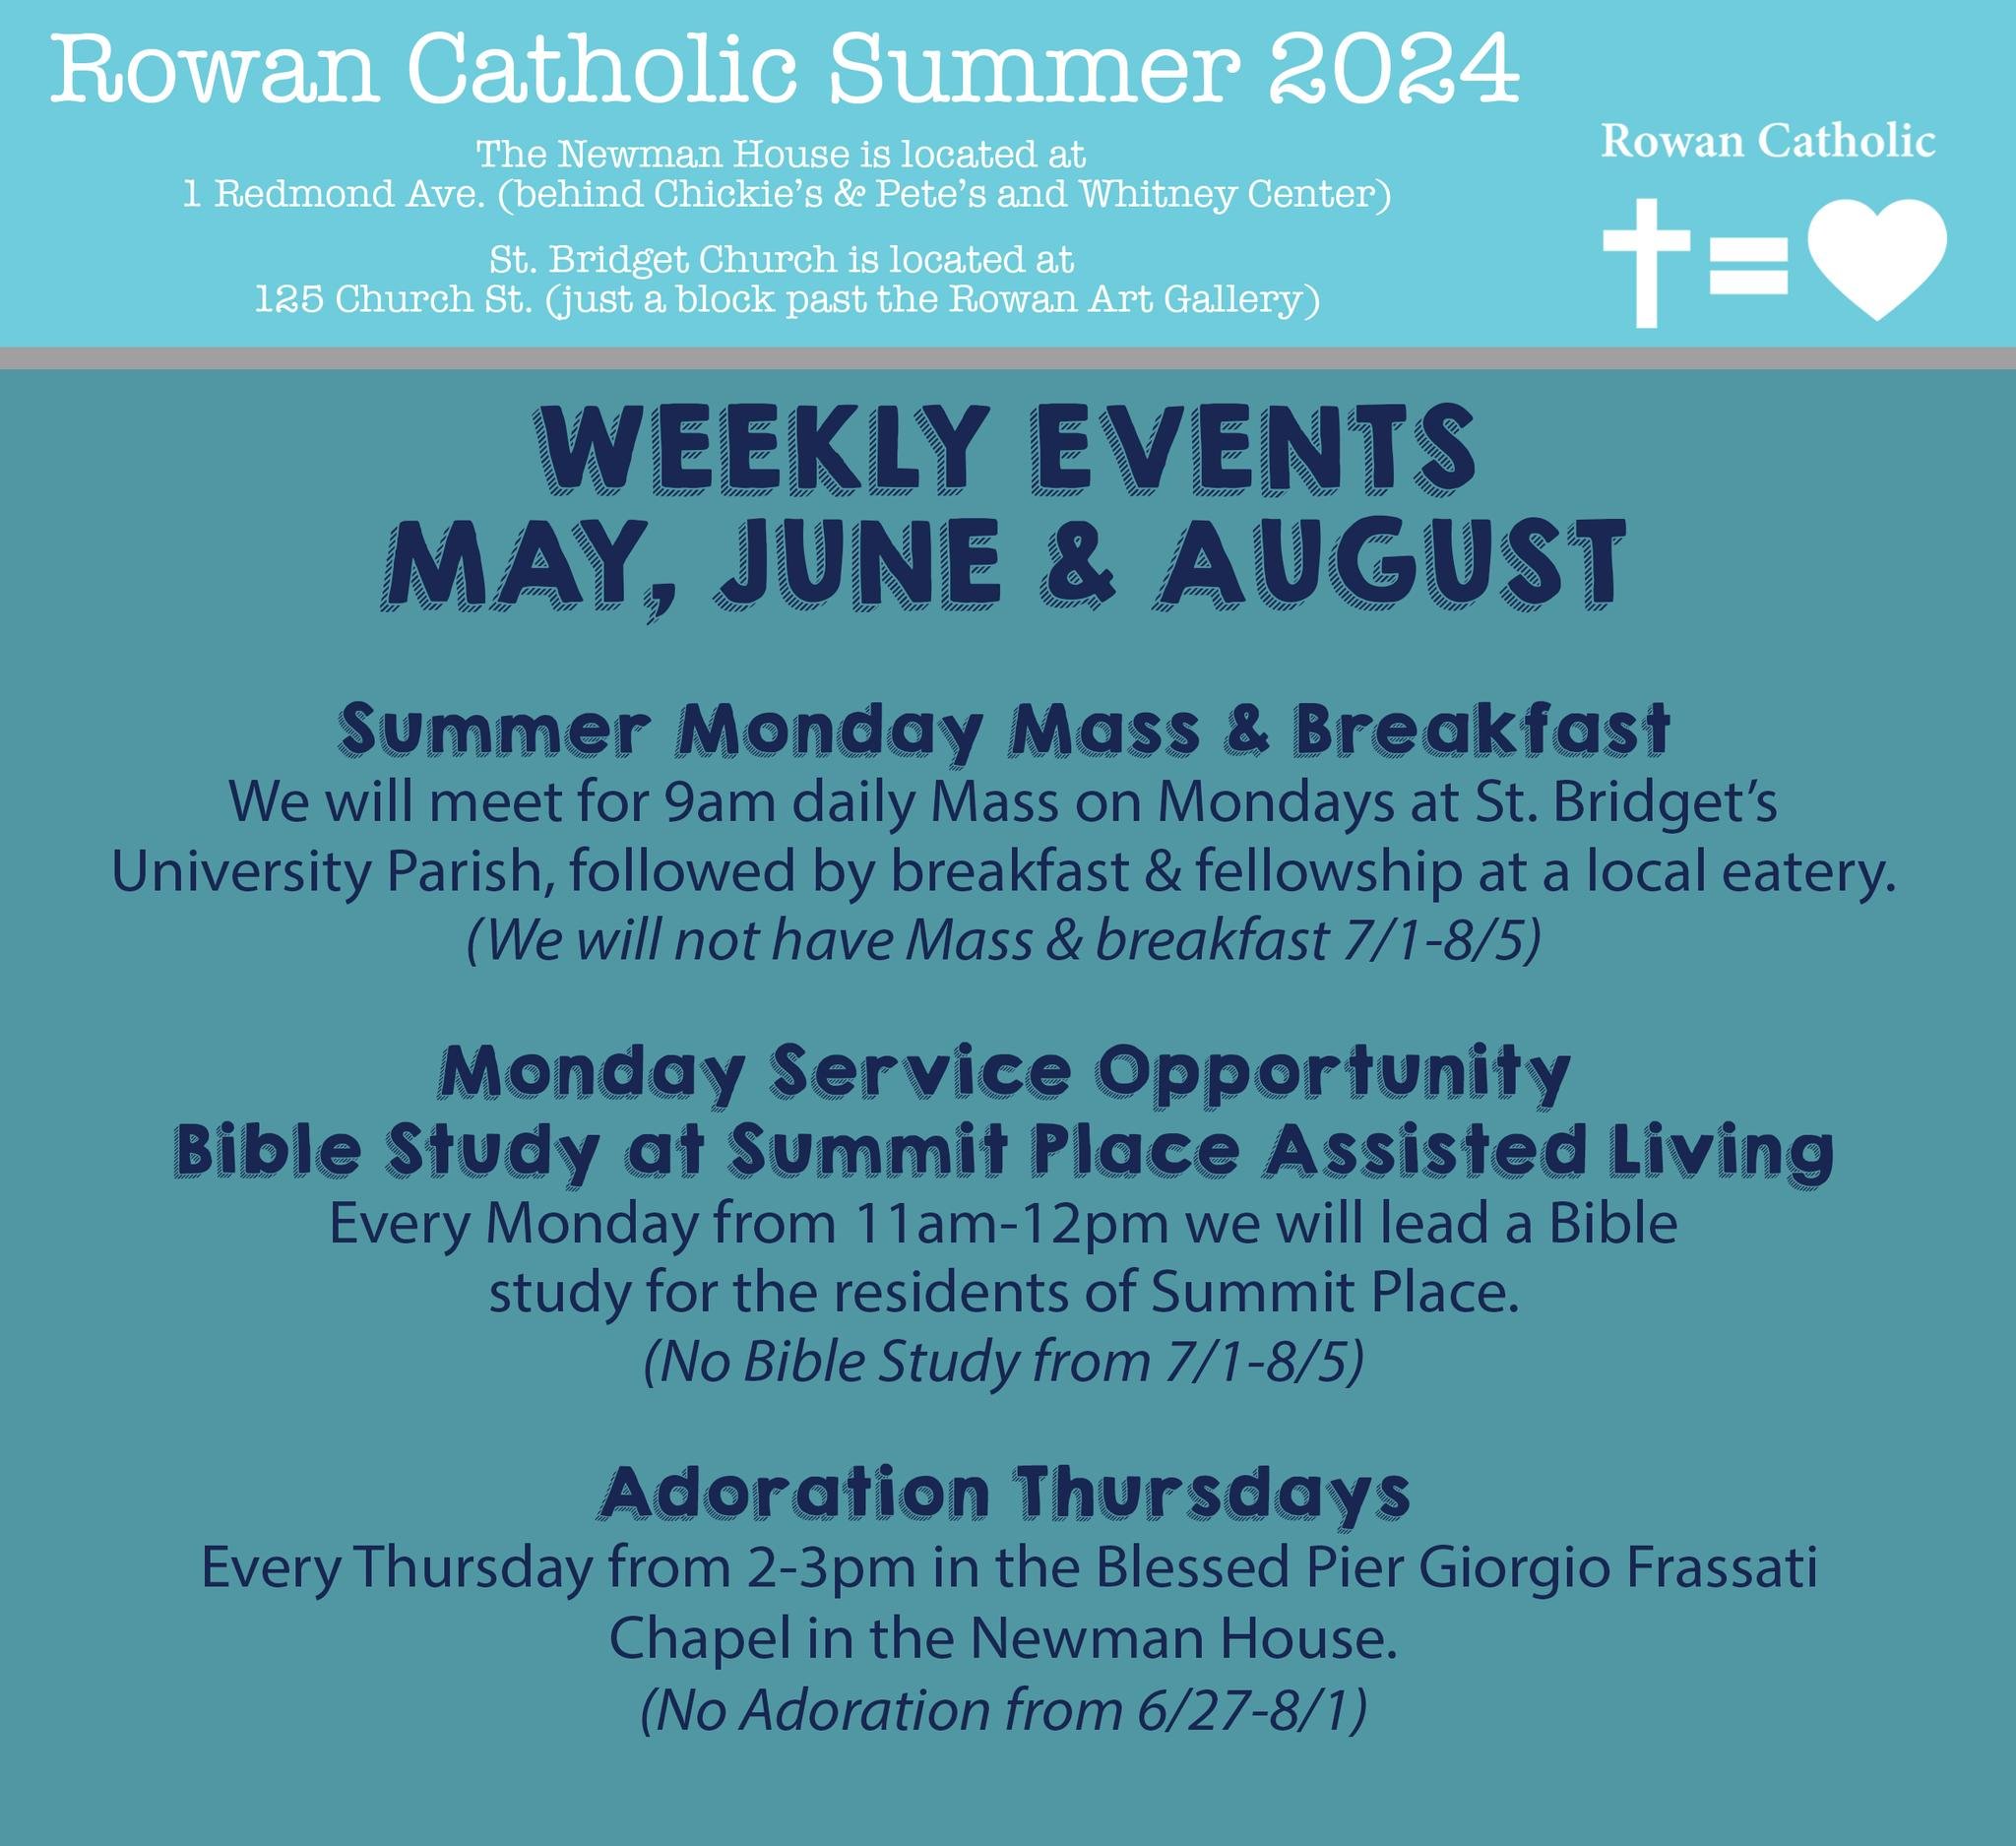 Just because the semester is over, doesn't mean the fun &amp; faith opportunities will end! Here is our Rowan Catholic Newman House Summer schedule of events! 

They are open to all Rowan University as well as RCSJ/RCBC current students. We also invi